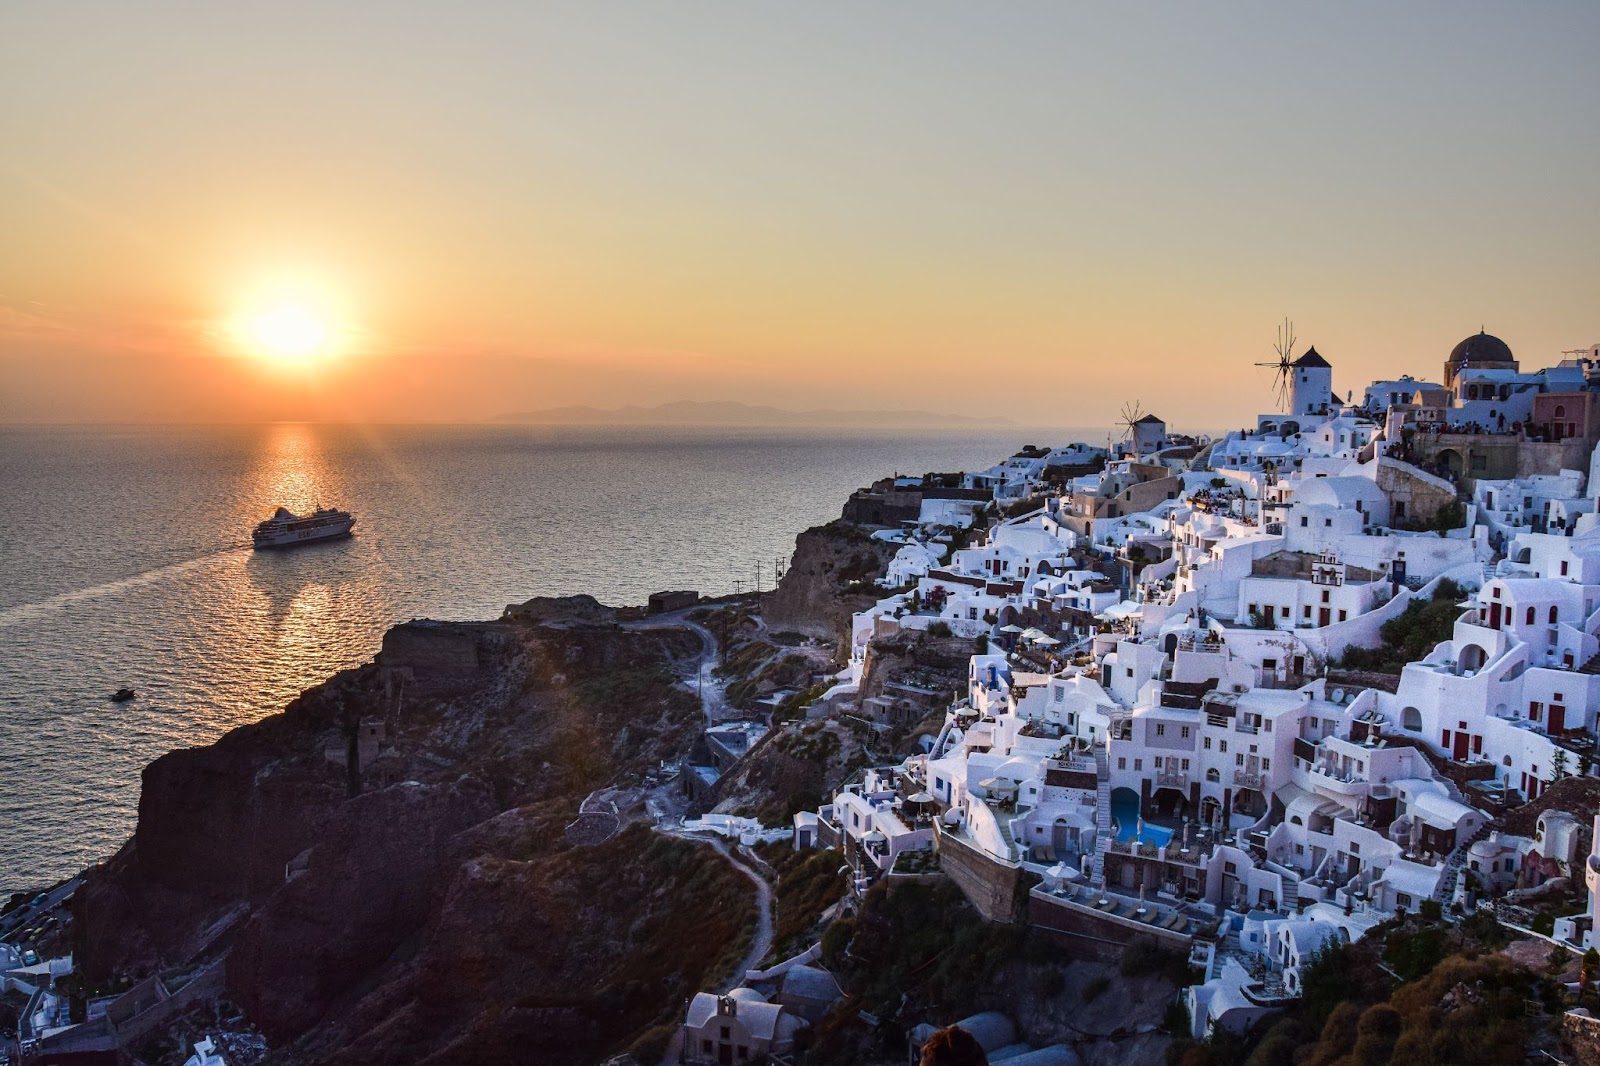 Santorini sunset - a no-miss experience no matter how many days in Santorini you are